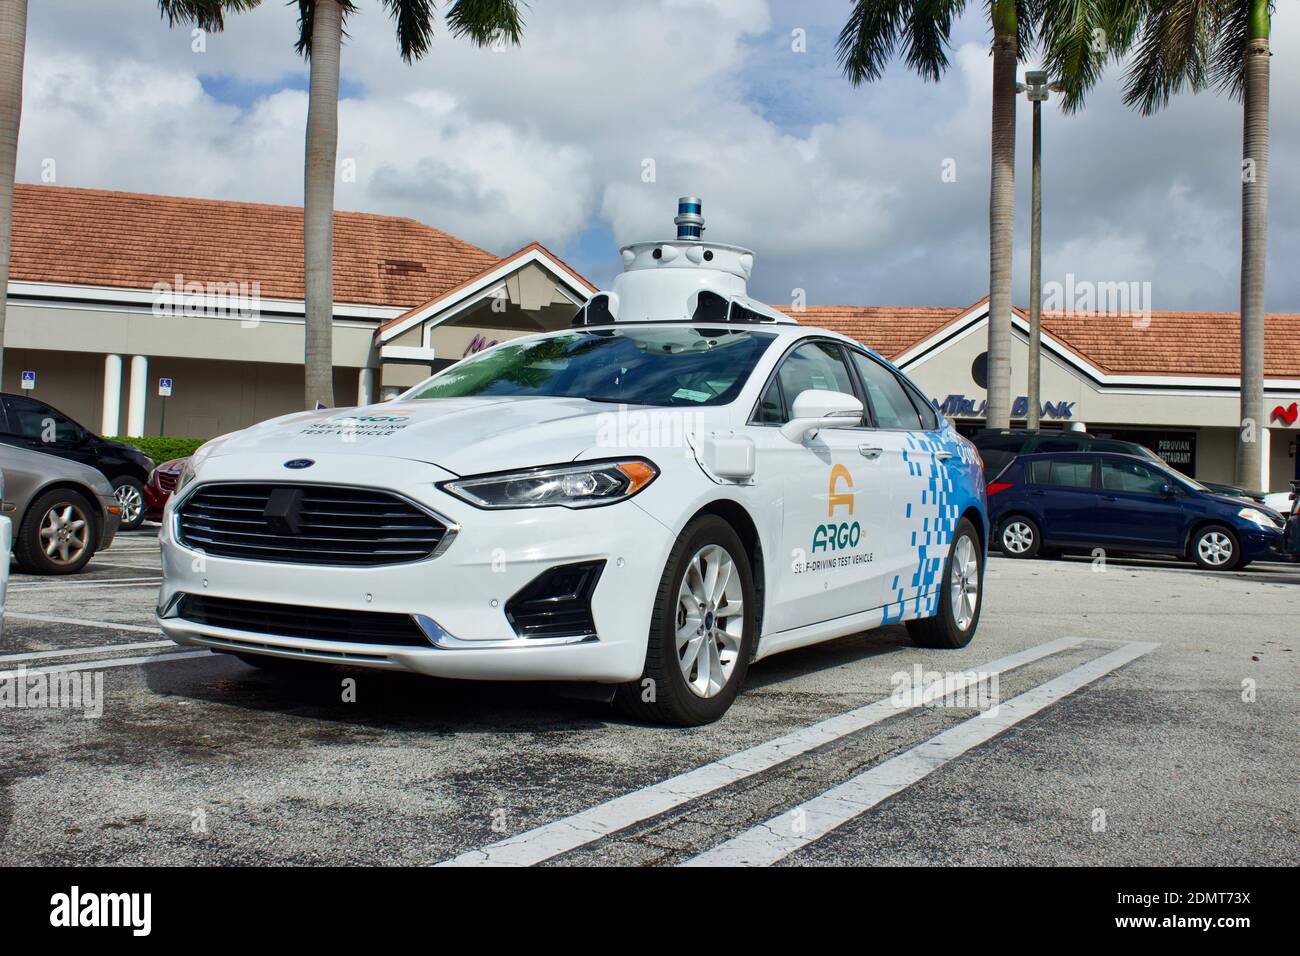 Doral FL 11/10/2020 ARGO.AI self driving test vehicle on public roads mapping lanes and 3d photo imaging area for future applications. Stock Photo